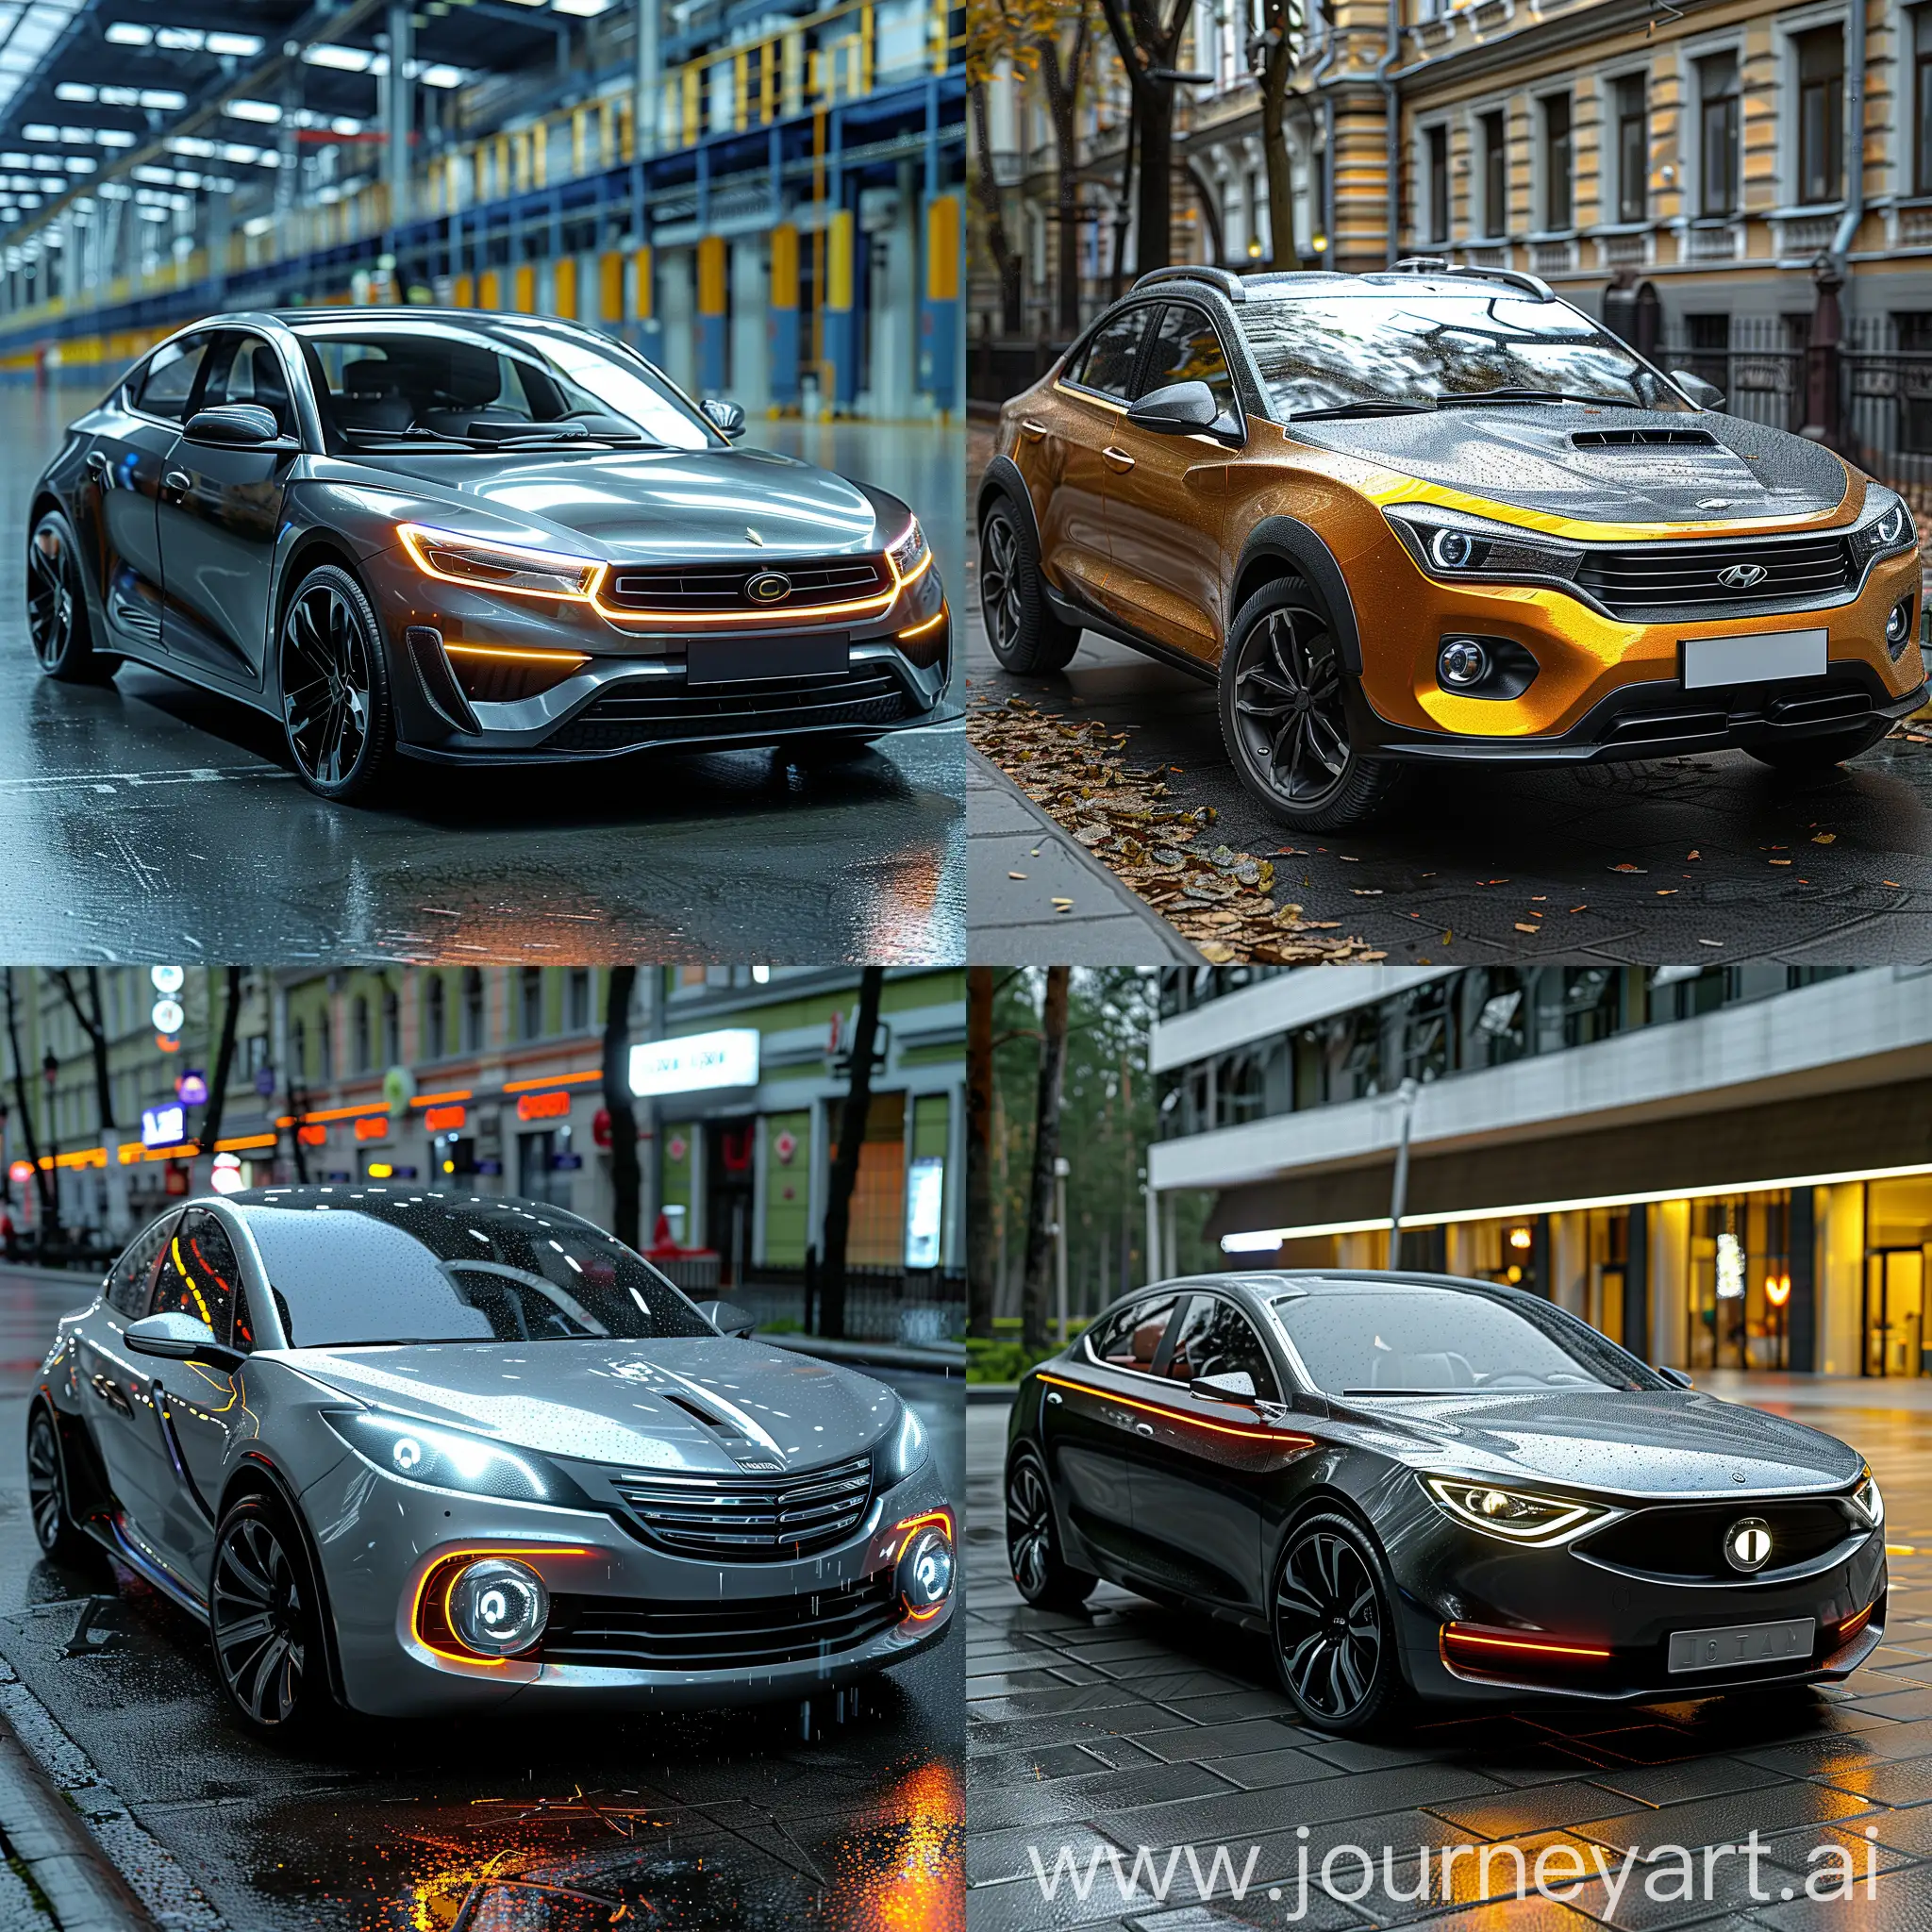 Futuristic LADA Vesta https://upload.wikimedia.org/wikipedia/commons/thumb/8/85/Lada_Vesta_%28cropped%29.jpg/280px-Lada_Vesta_%28cropped%29.jpg:: Autonomous Driving, Electric Powertrain, Advanced Safety Systems, Augmented Reality Heads-Up Display:, Biometric Recognition, Smart Materials, Holographic Infotainment System, Self-Healing Paint, Advanced Connectivity, Sustainable Materials, octane render --stylize 1000